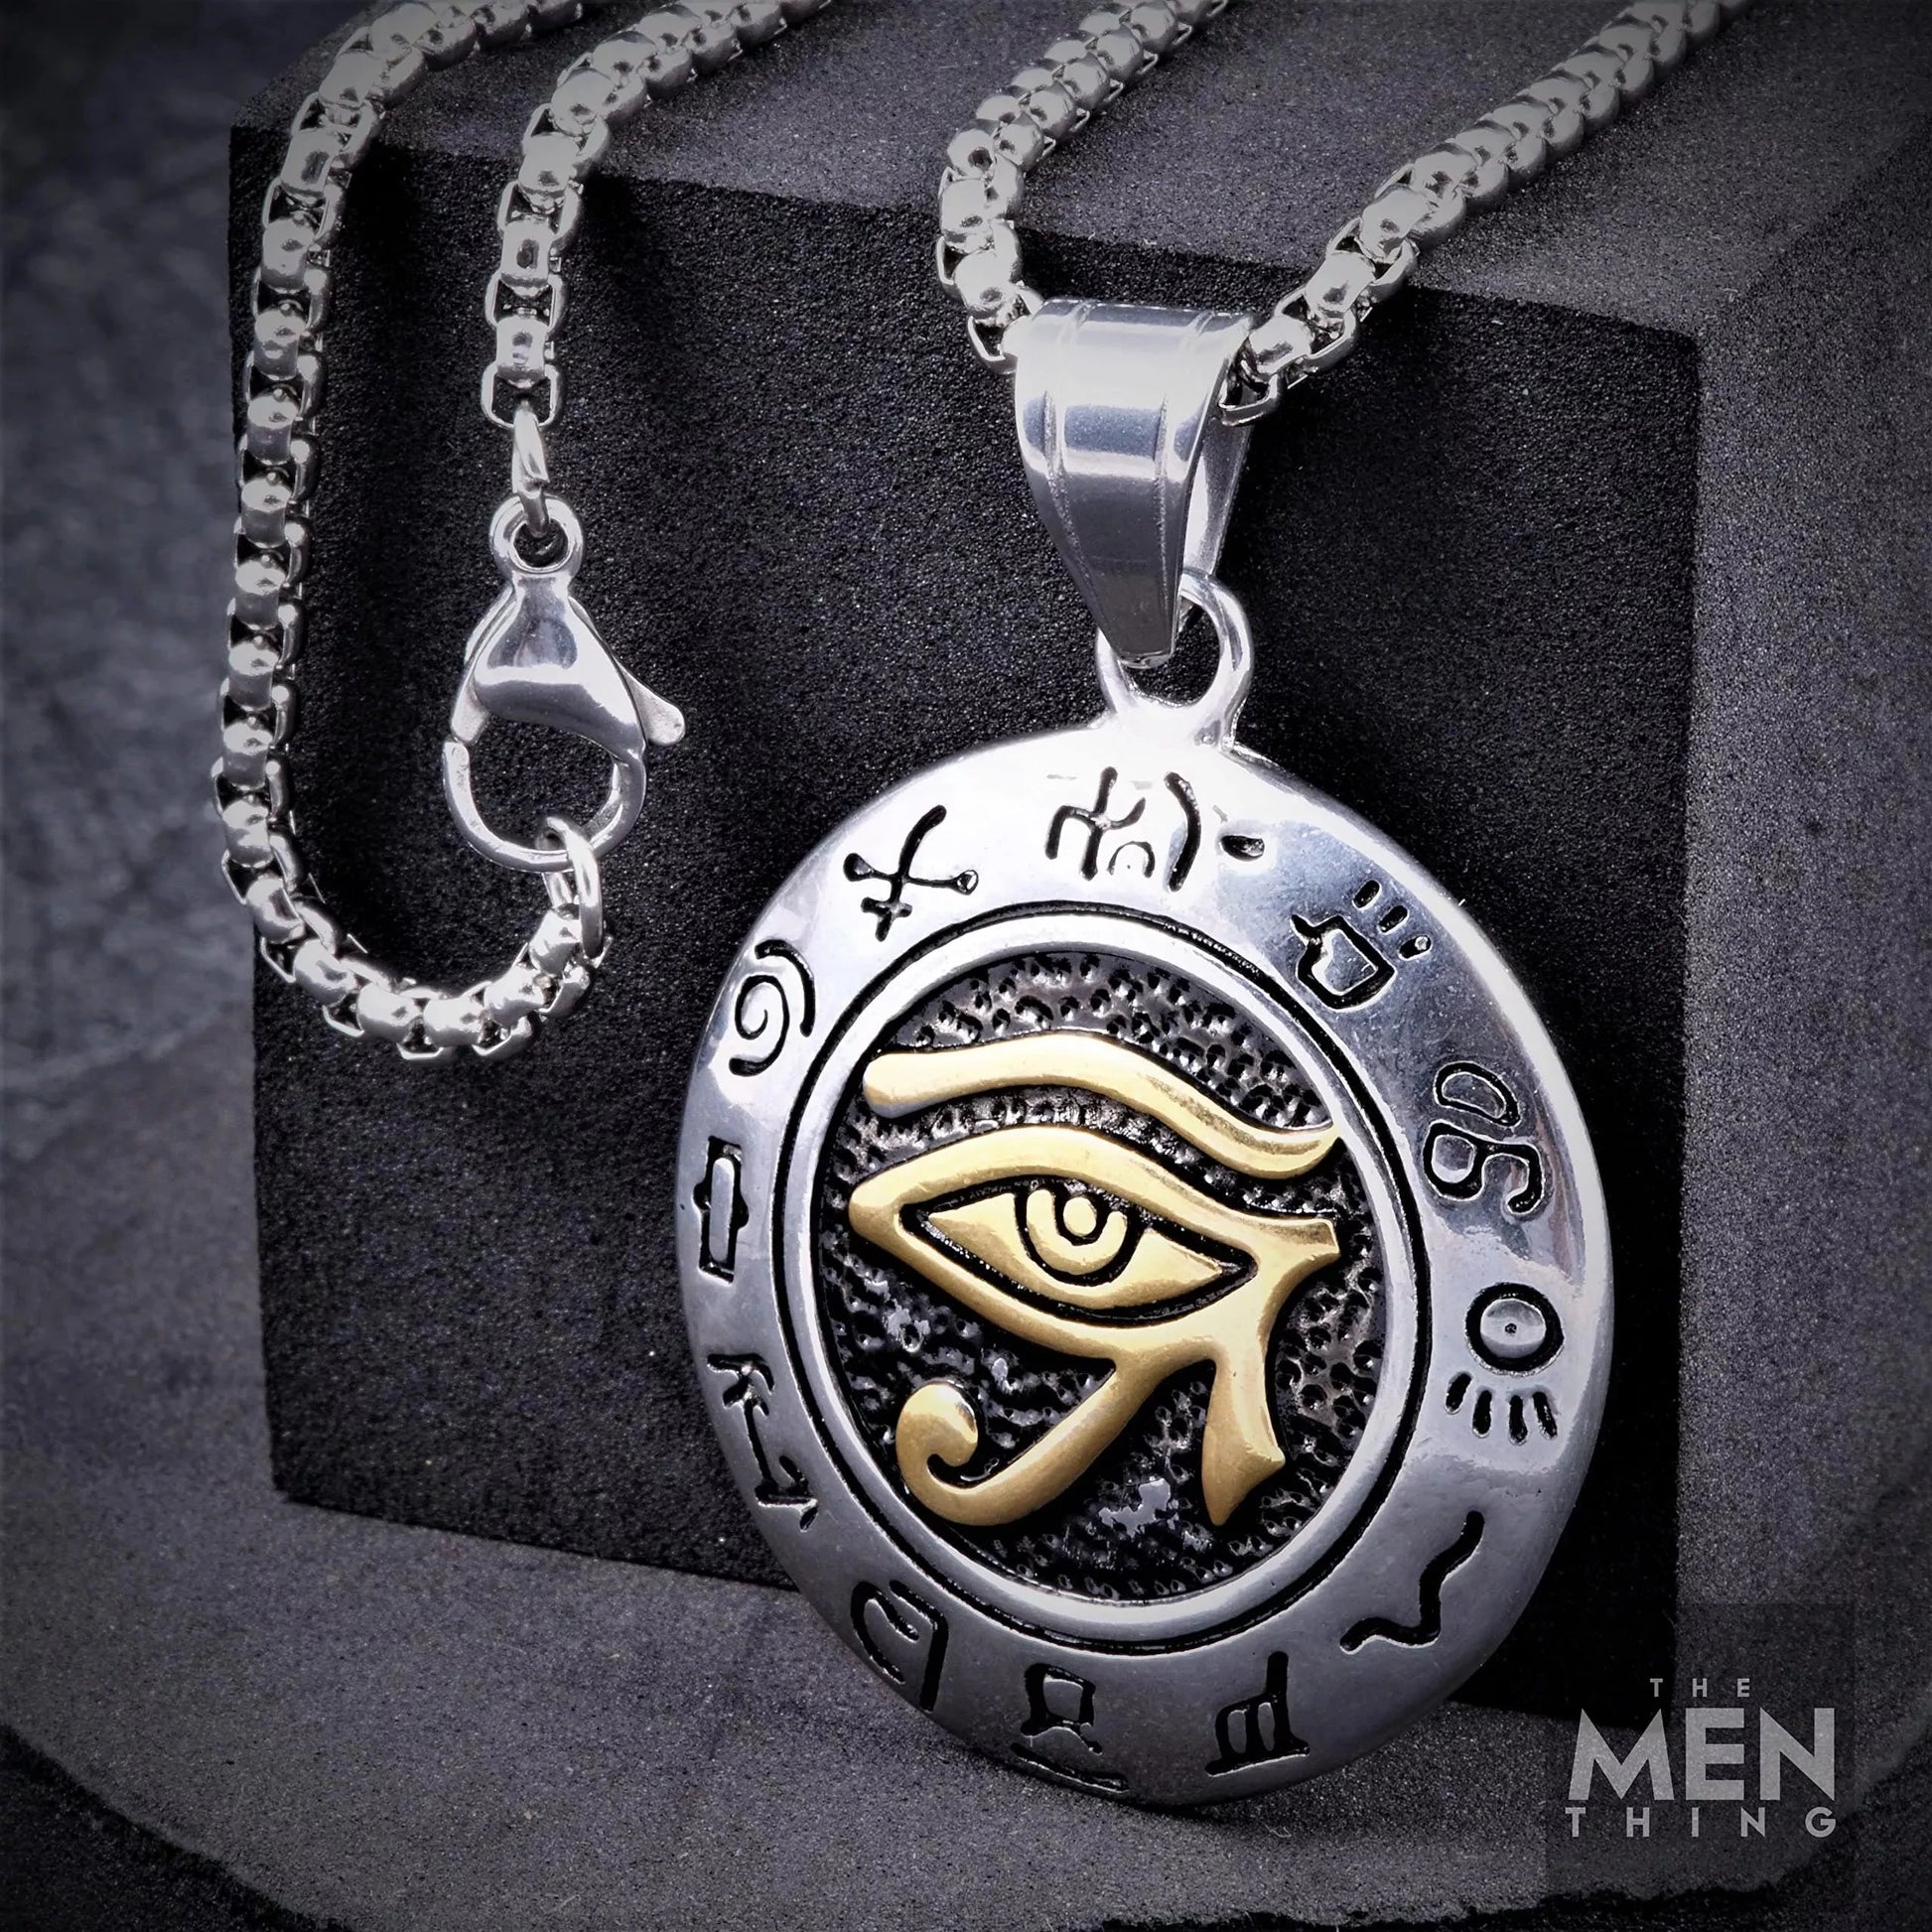 THE MEN THING Pendant for Men - Pure Titanium Steel Eye of Horus Pendant with 24inch Round Box Chain for Men & Boys